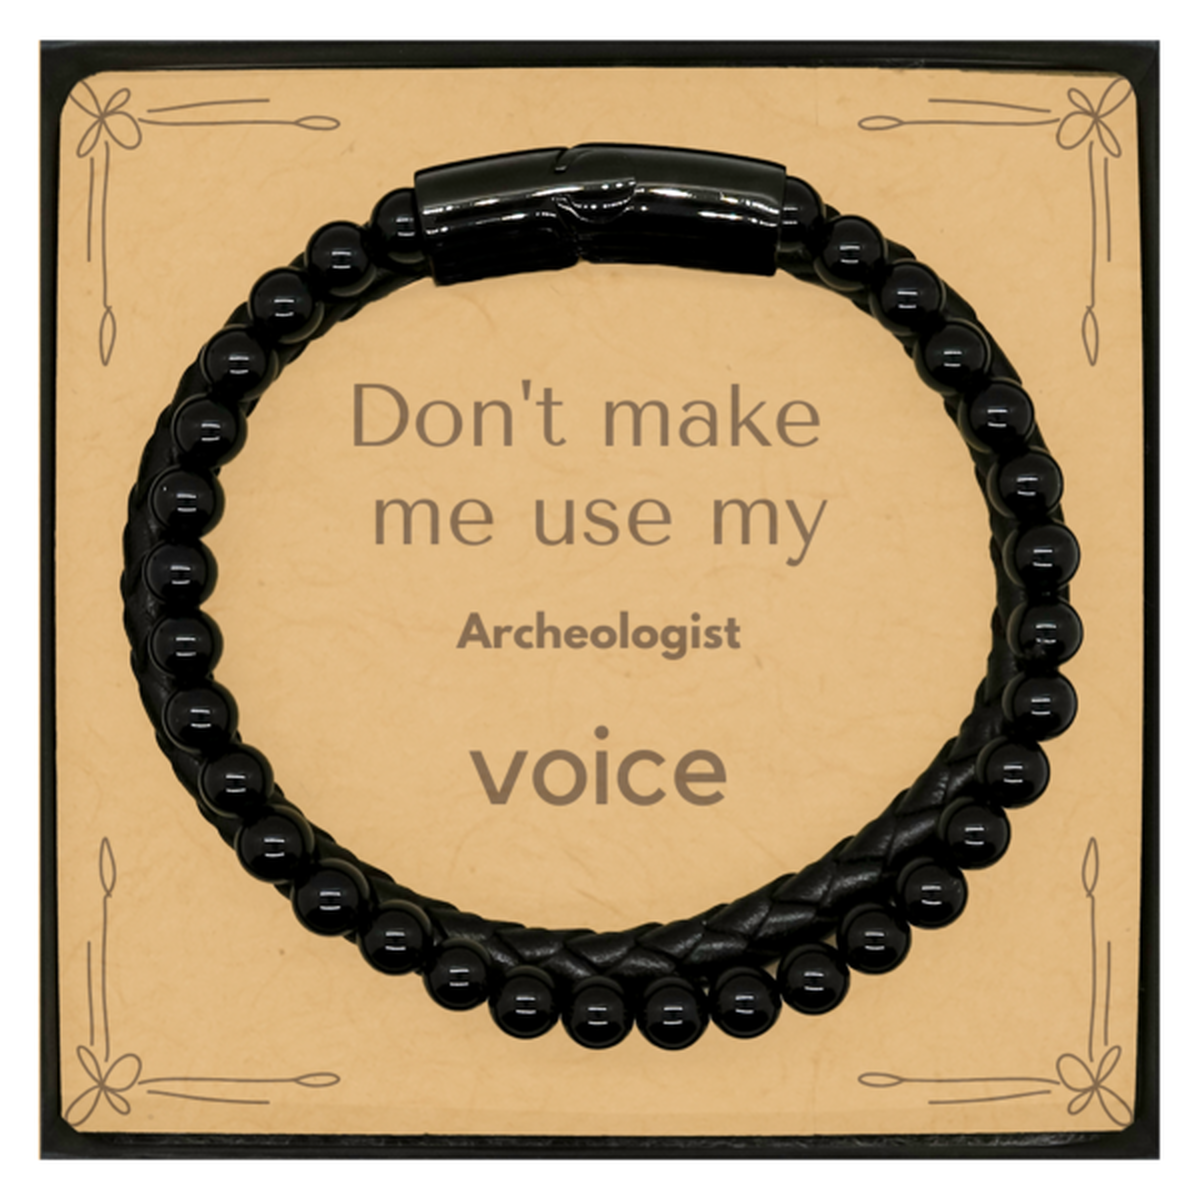 Don't make me use my Archeologist voice, Sarcasm Archeologist Card Gifts, Christmas Archeologist Stone Leather Bracelets Birthday Unique Gifts For Archeologist Coworkers, Men, Women, Colleague, Friends